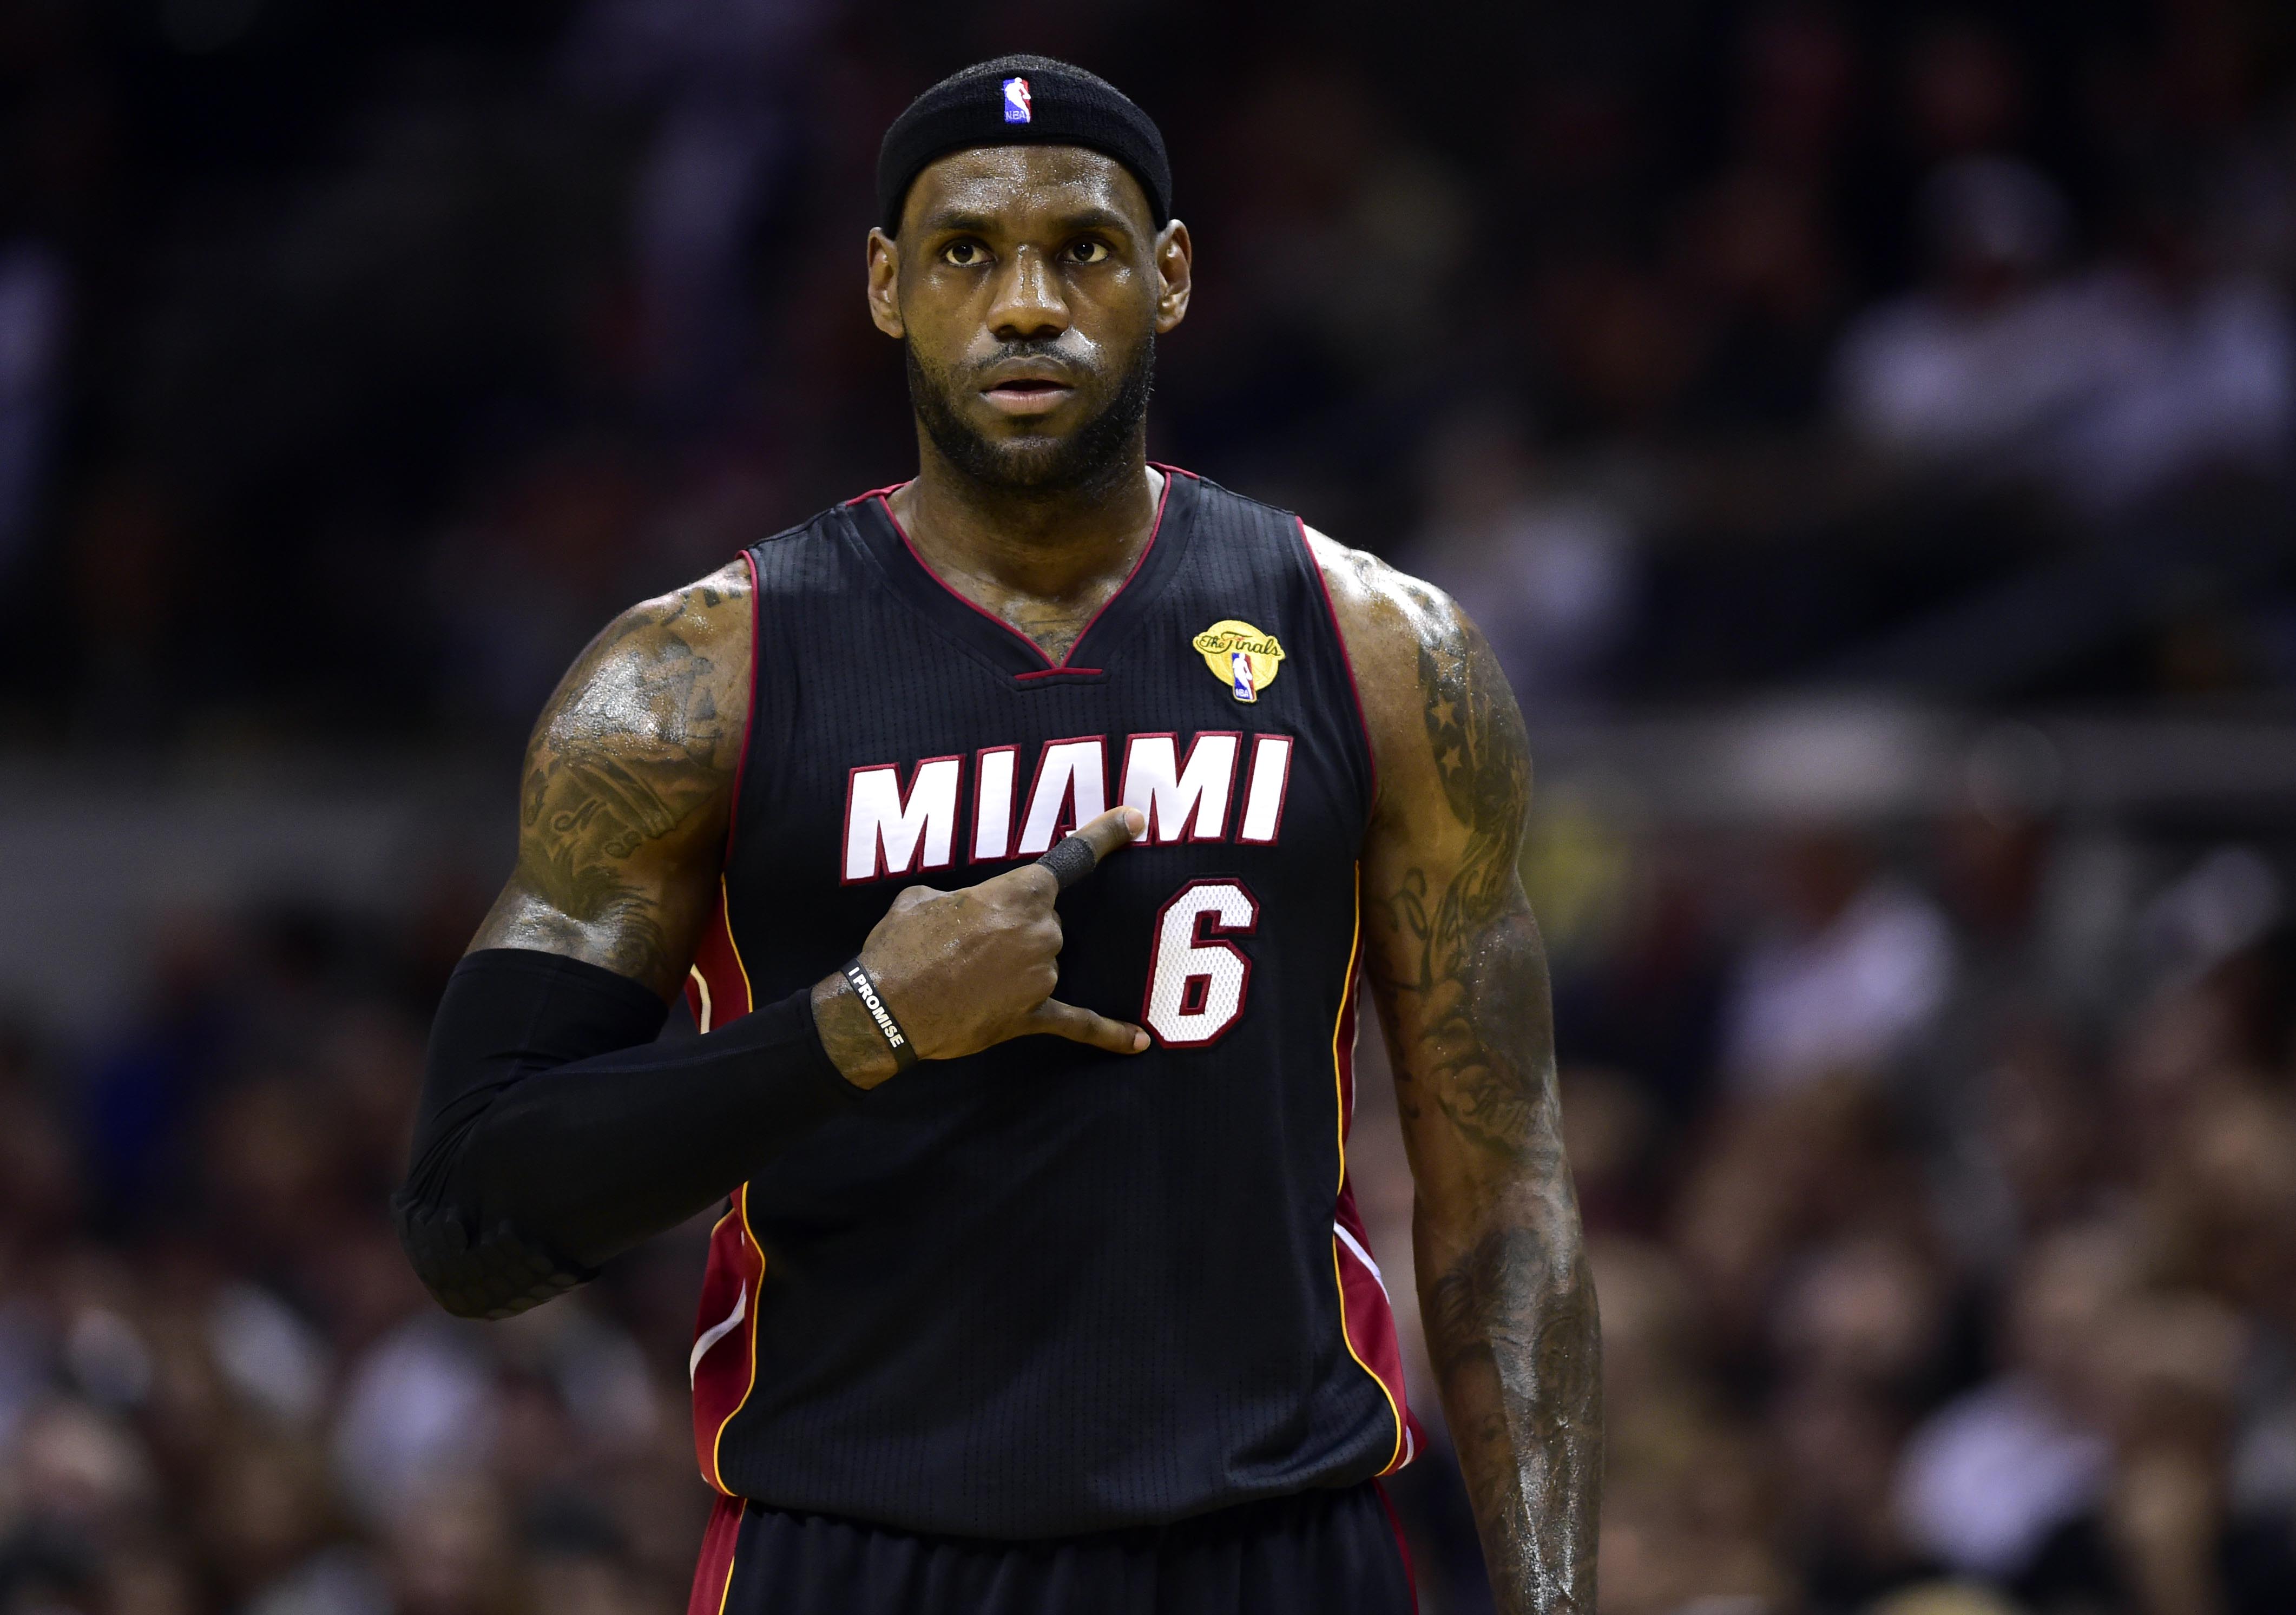 LeBron James says he's returning to Cavaliers, Sports